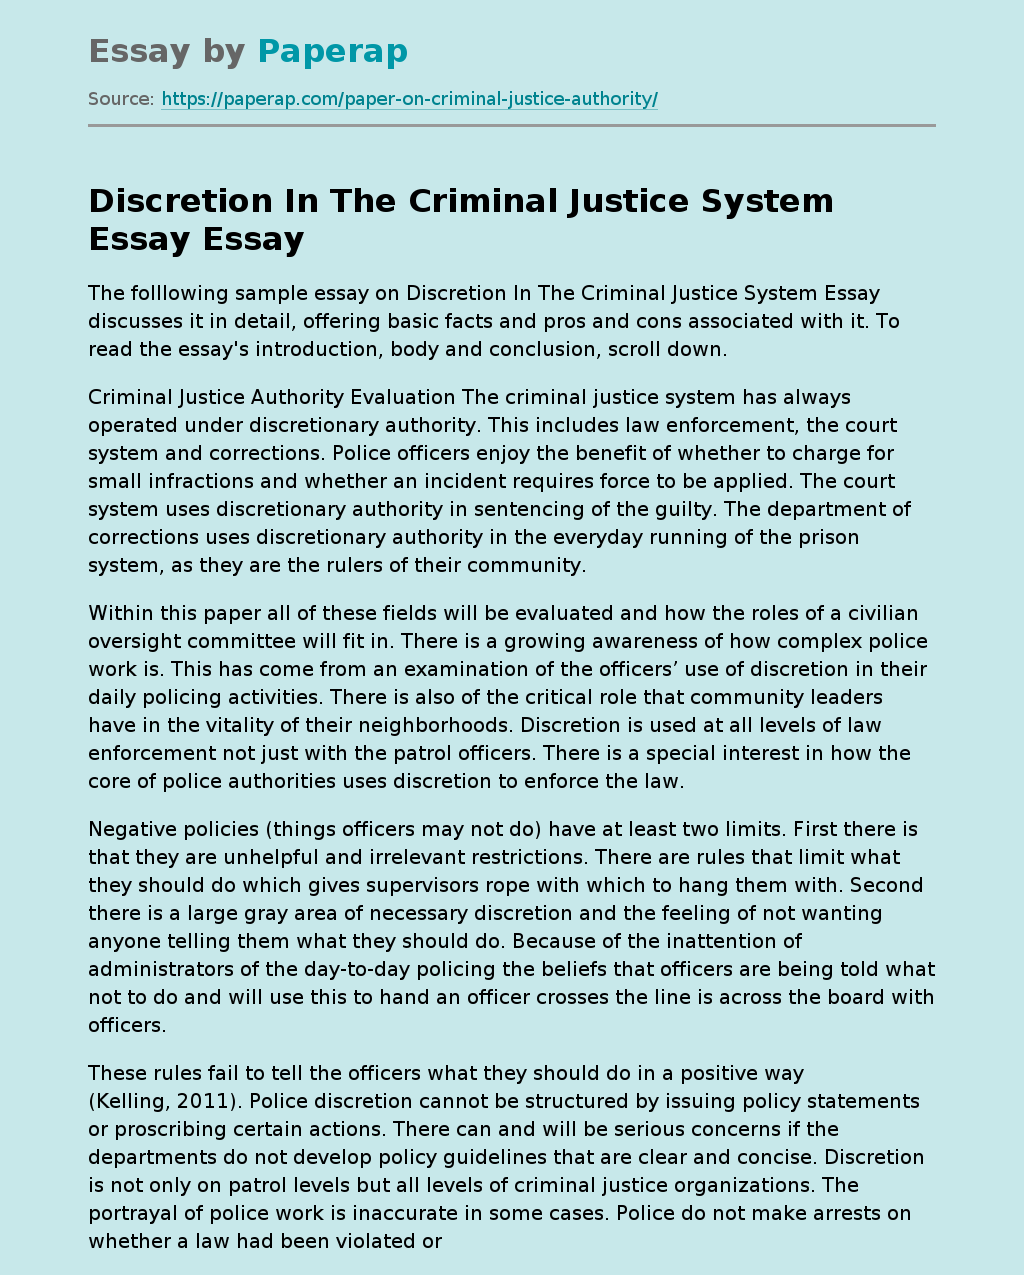 Discretion In The Criminal Justice System Essay